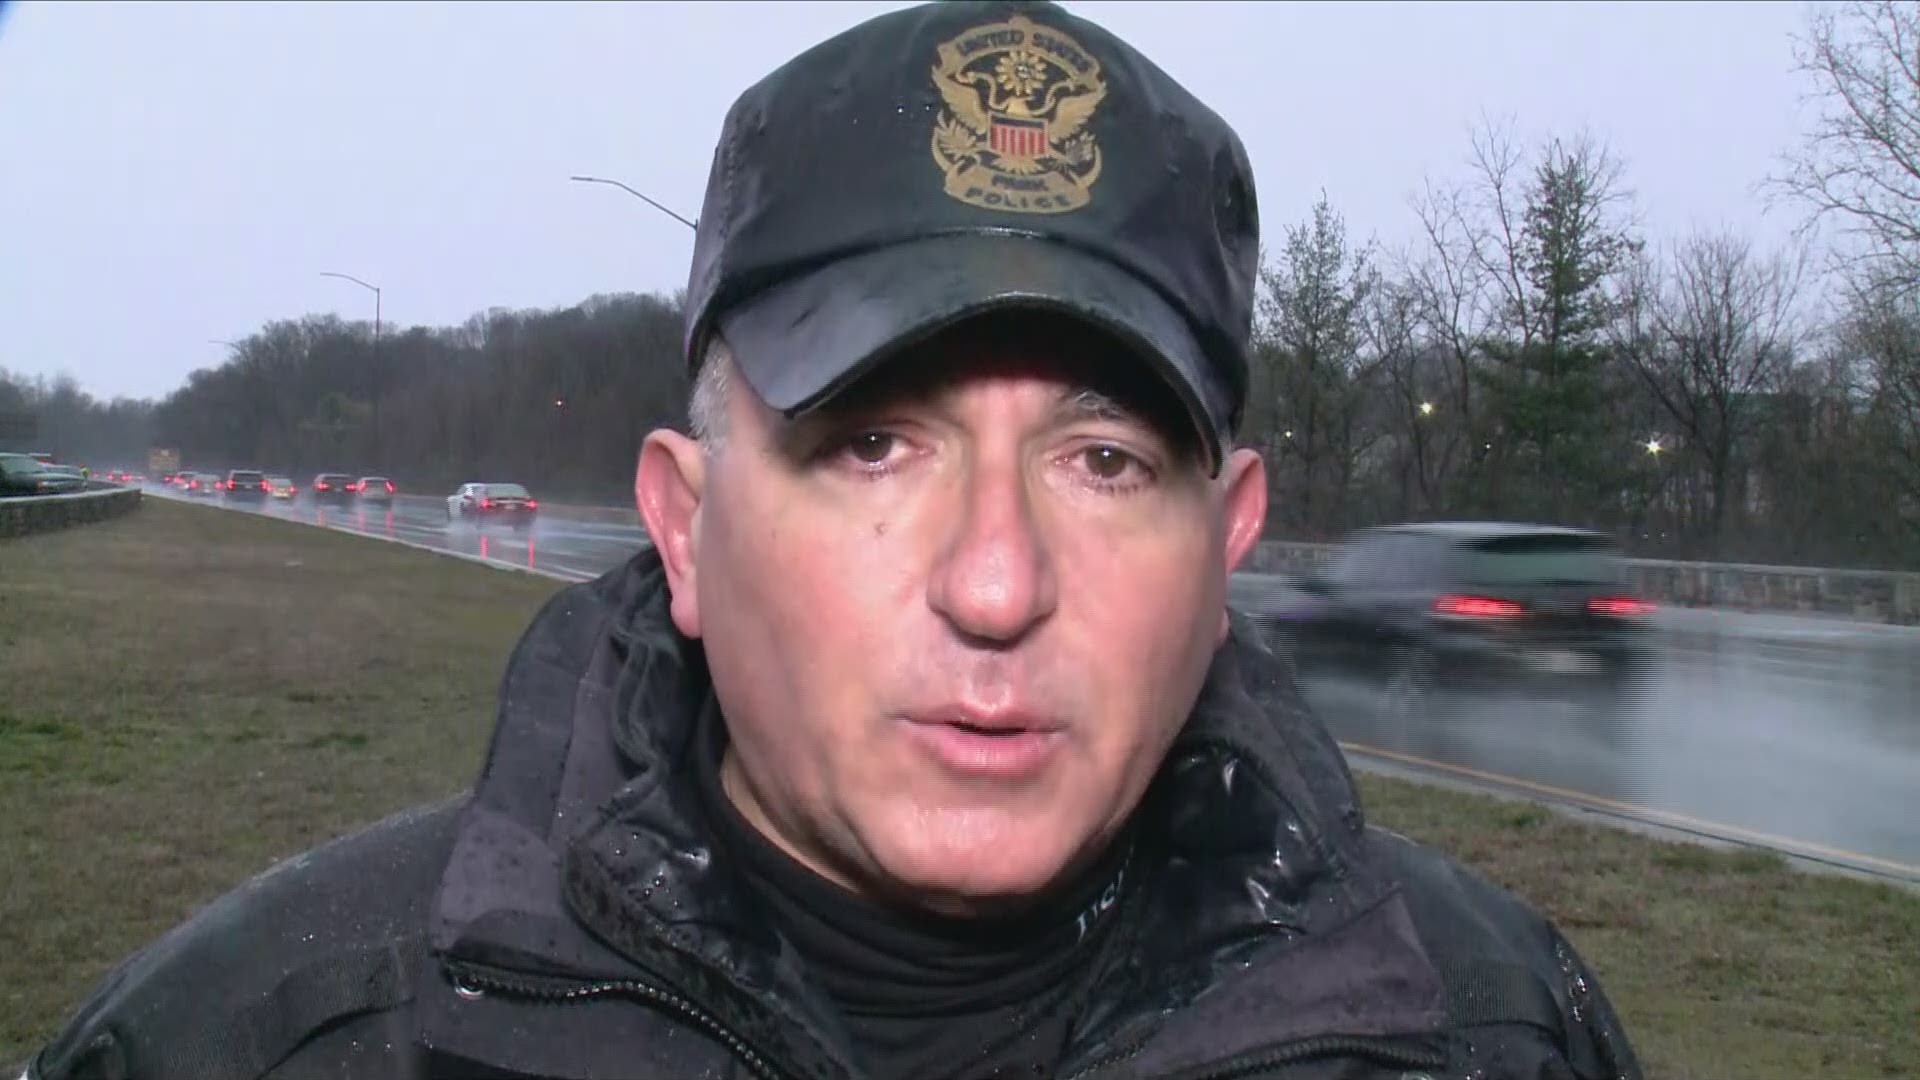 Lt. Simeon Klebner of the U.S. Park Police shared an update on the fatal pedestrian crash on BW Parkway Monday morning.